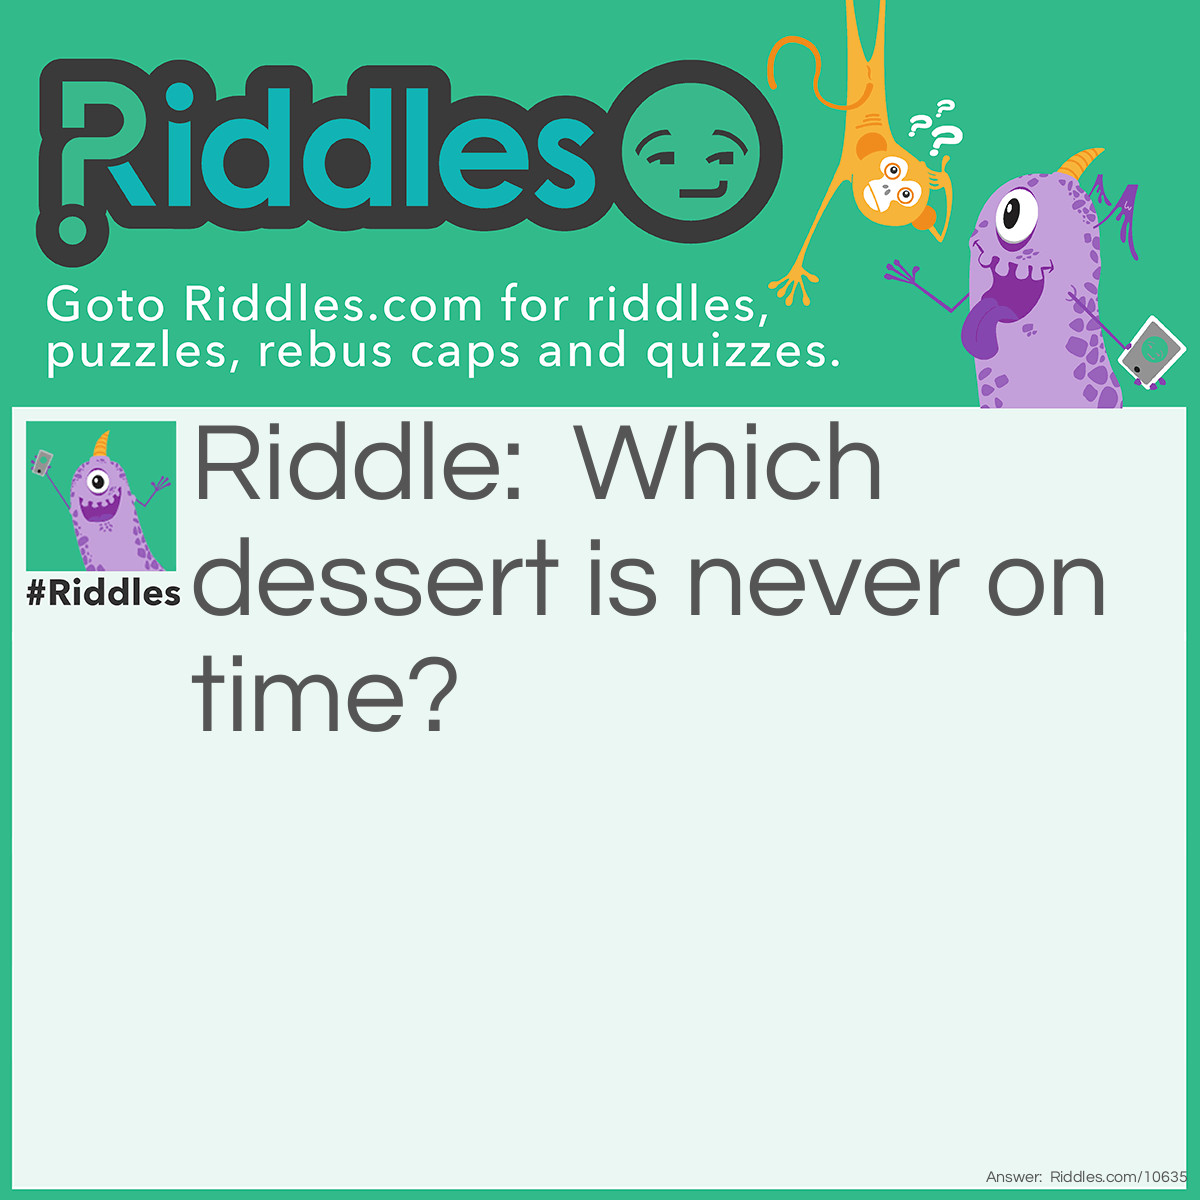 Riddle: Which dessert is never on time? Answer: Choco-Late